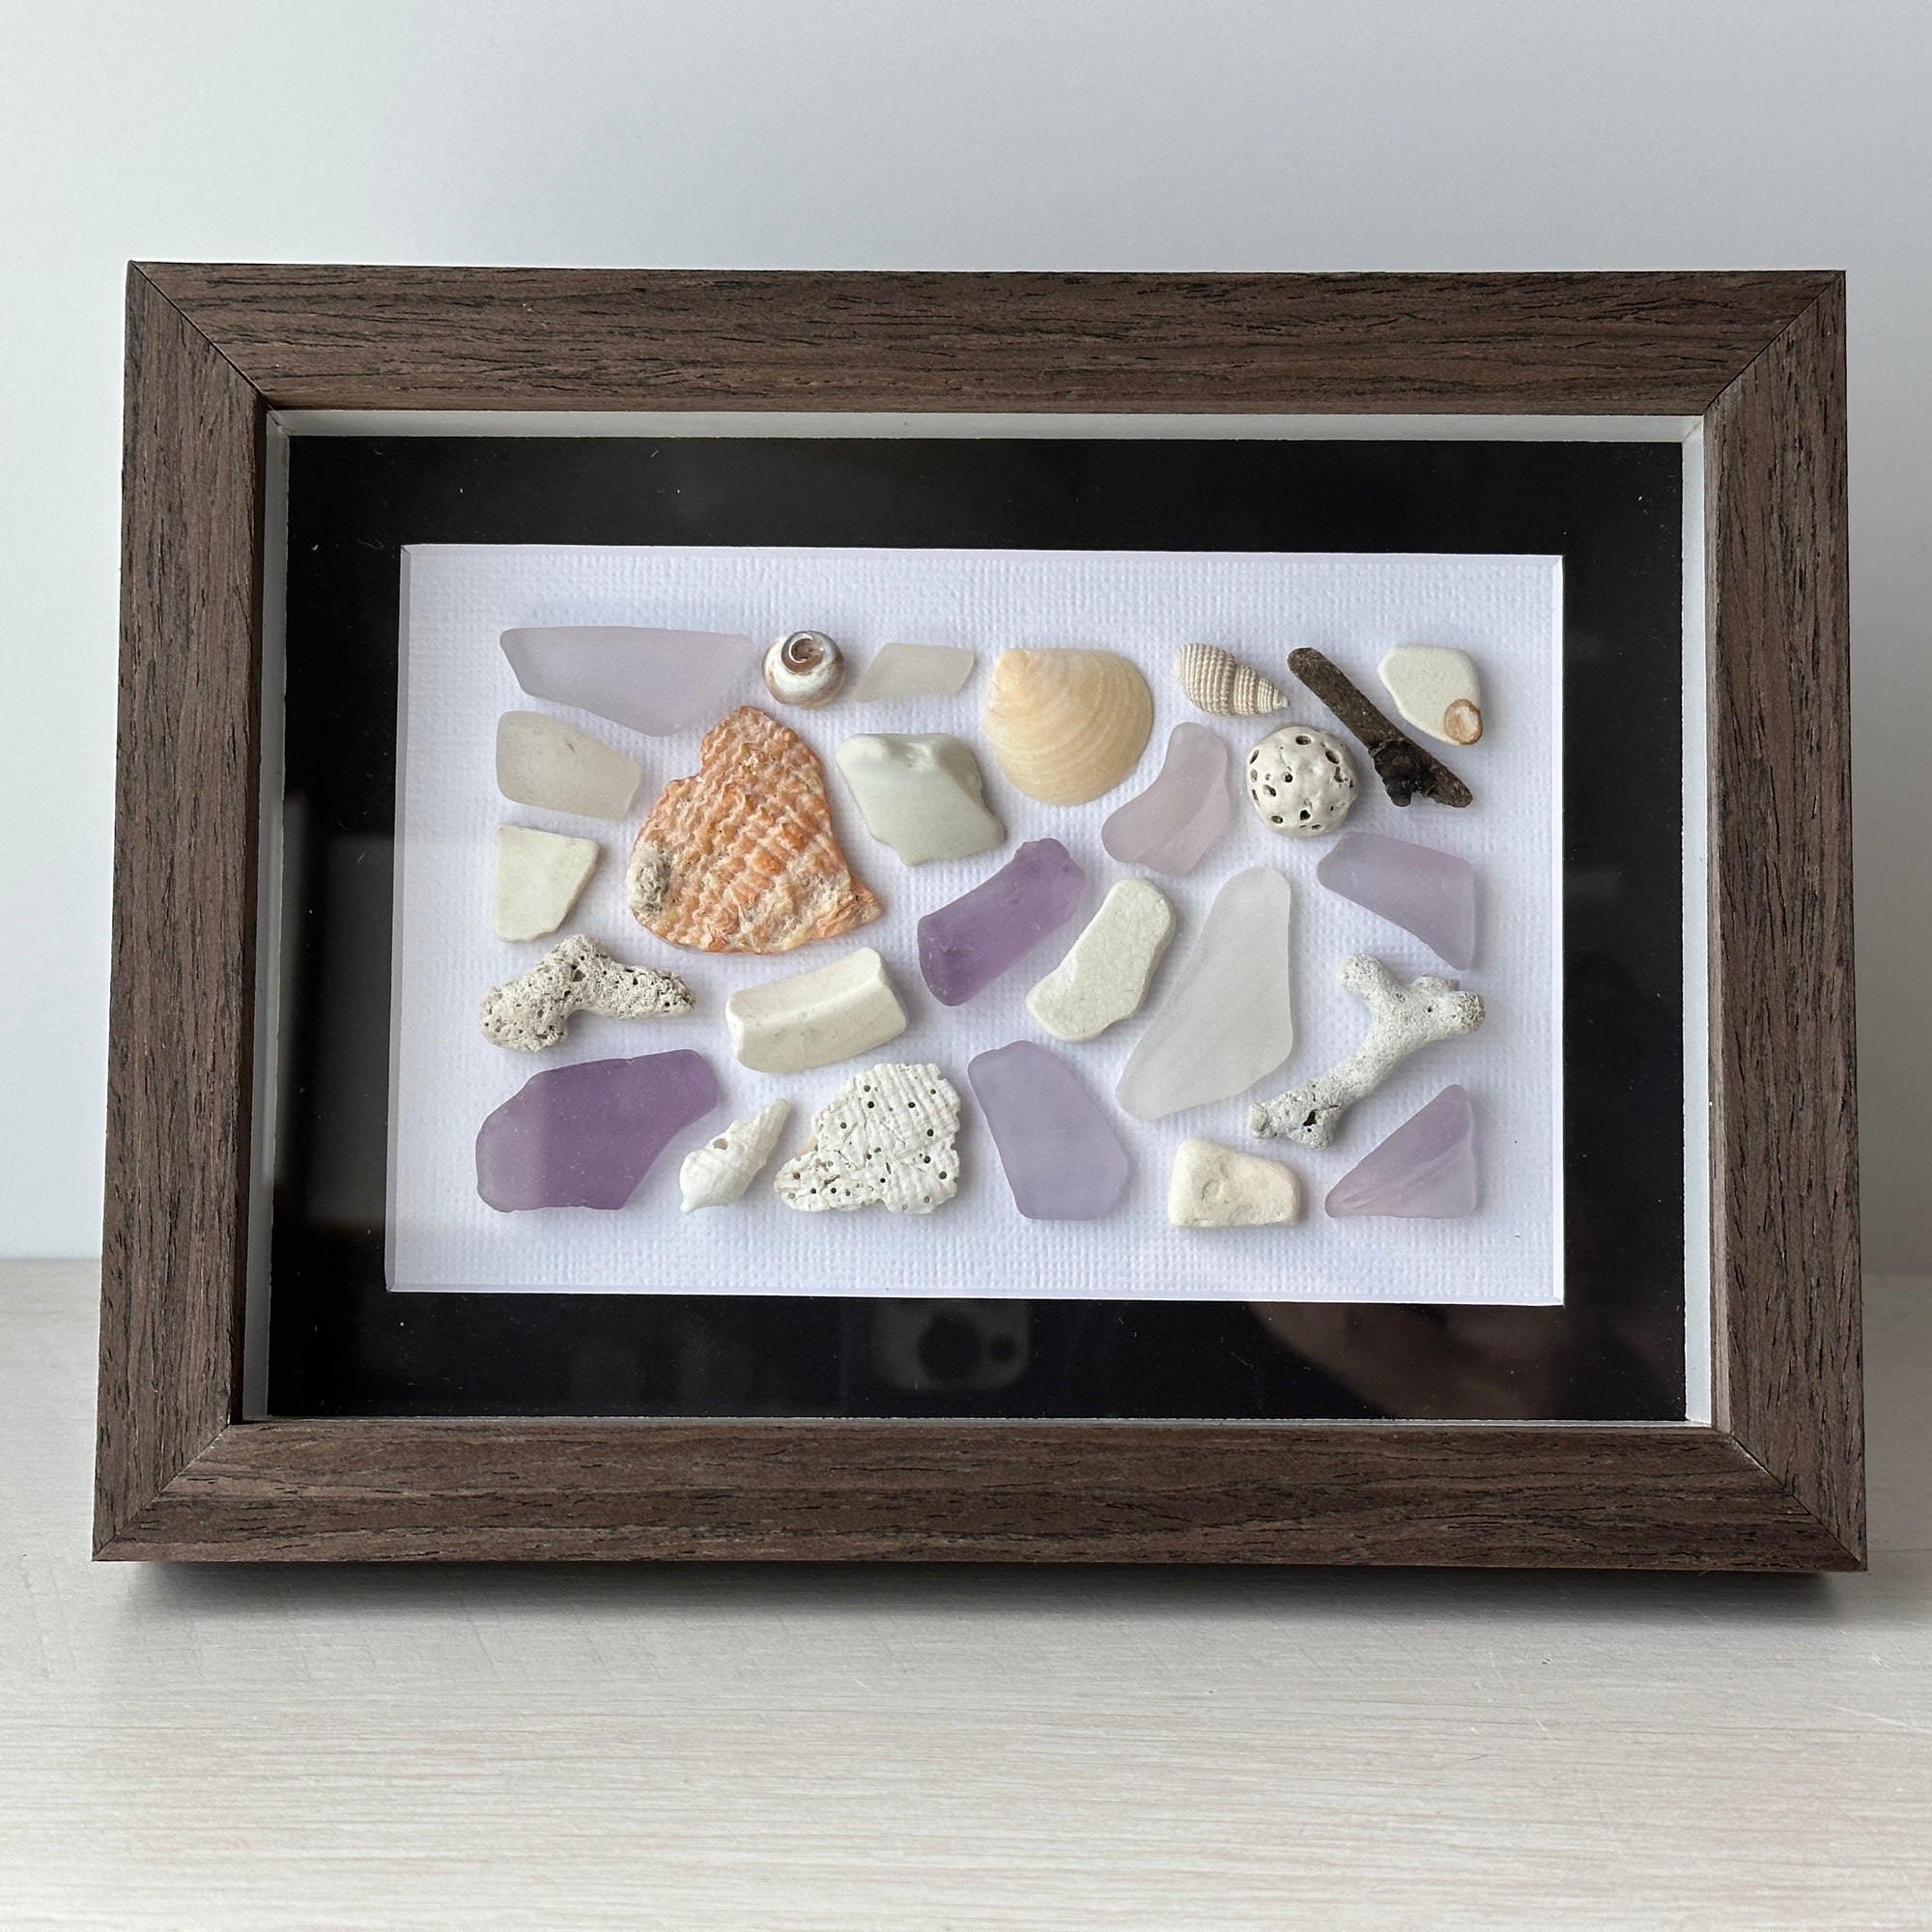 Sea Glass, Coral, Shells, Driftwood & Pottery Mosaic Picture Mixed Media Art